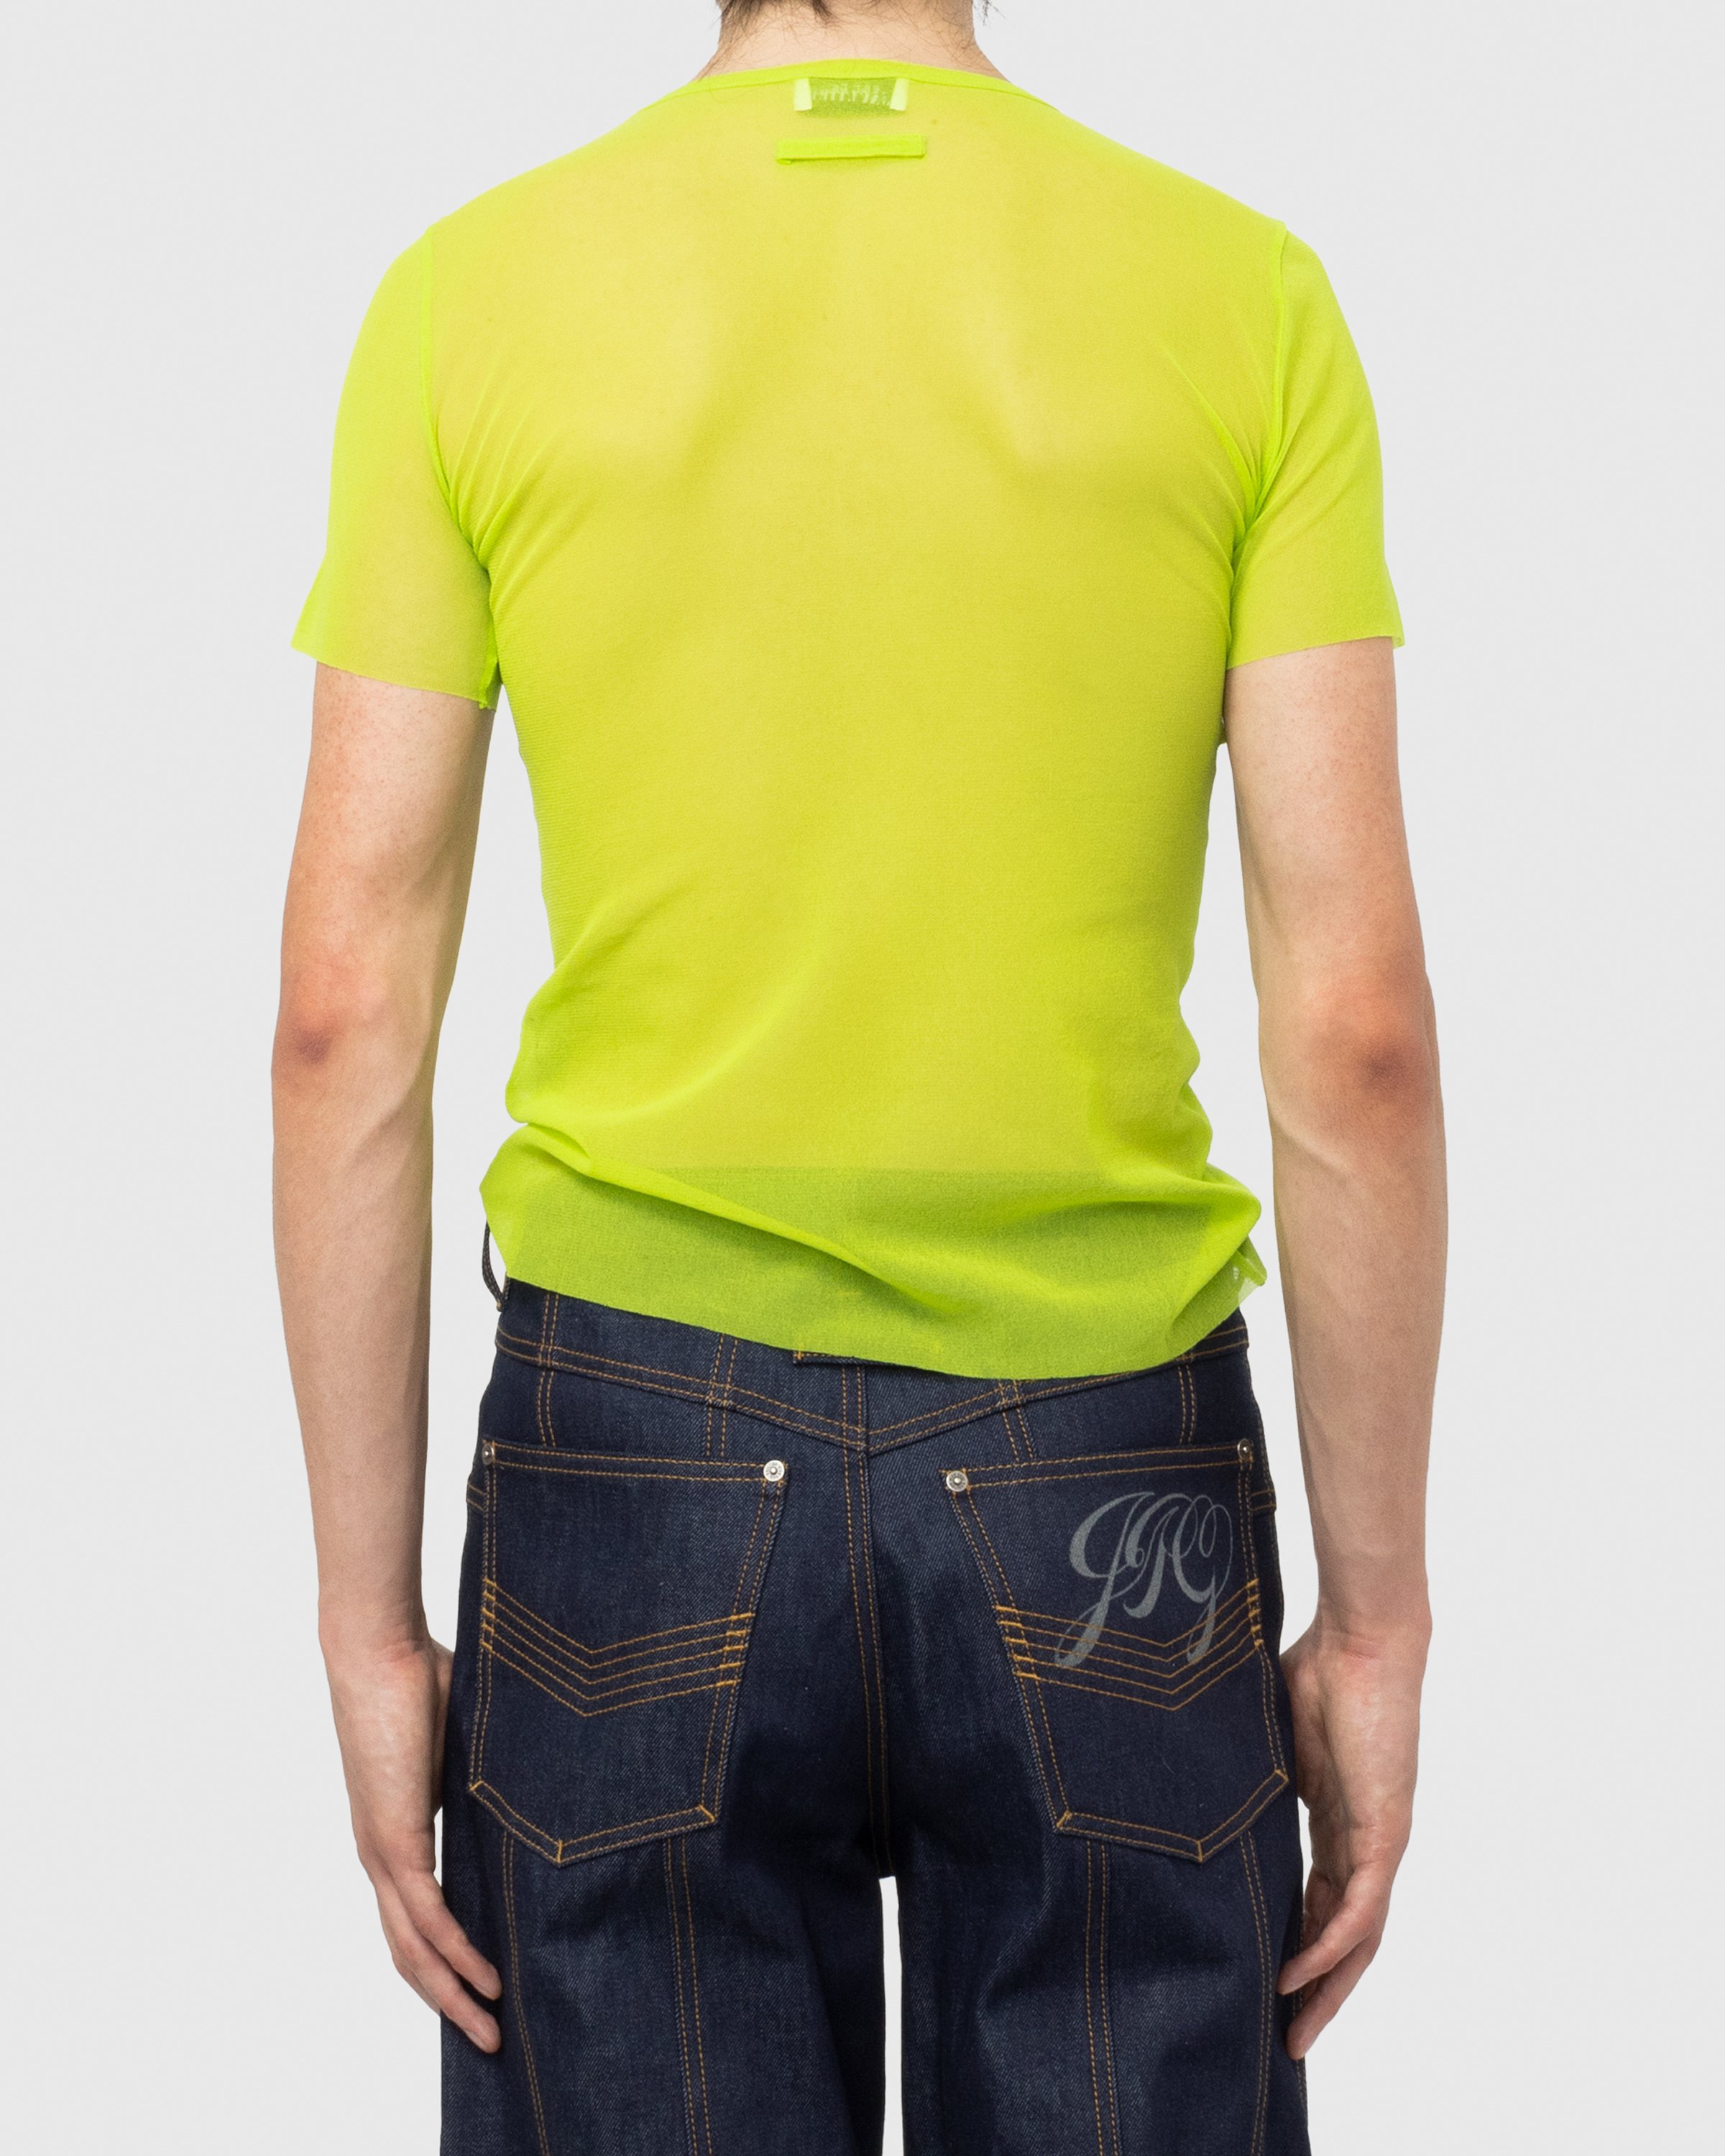 Jean Paul Gaultier - Évidemment Tulle T-Shirt Lime Green - Clothing - Green - Image 3